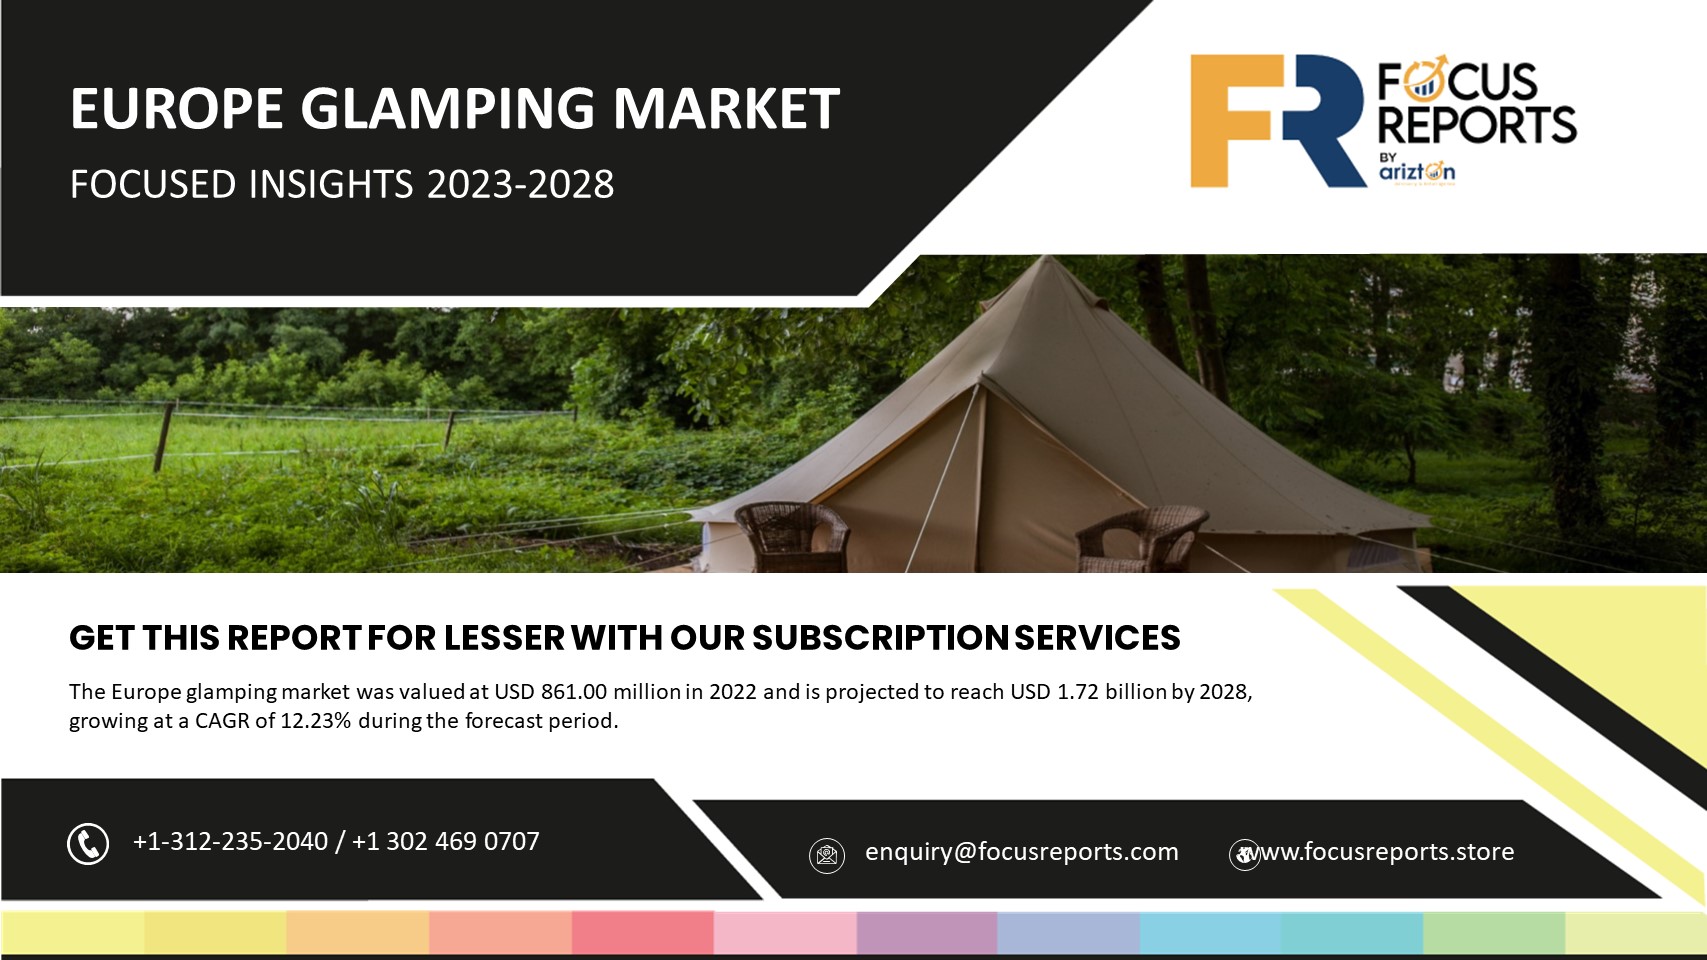 The Europe Glamping Market to Worth $1.72 Billion by 2028 - Exclusive Focus Insight Report by Arizton  